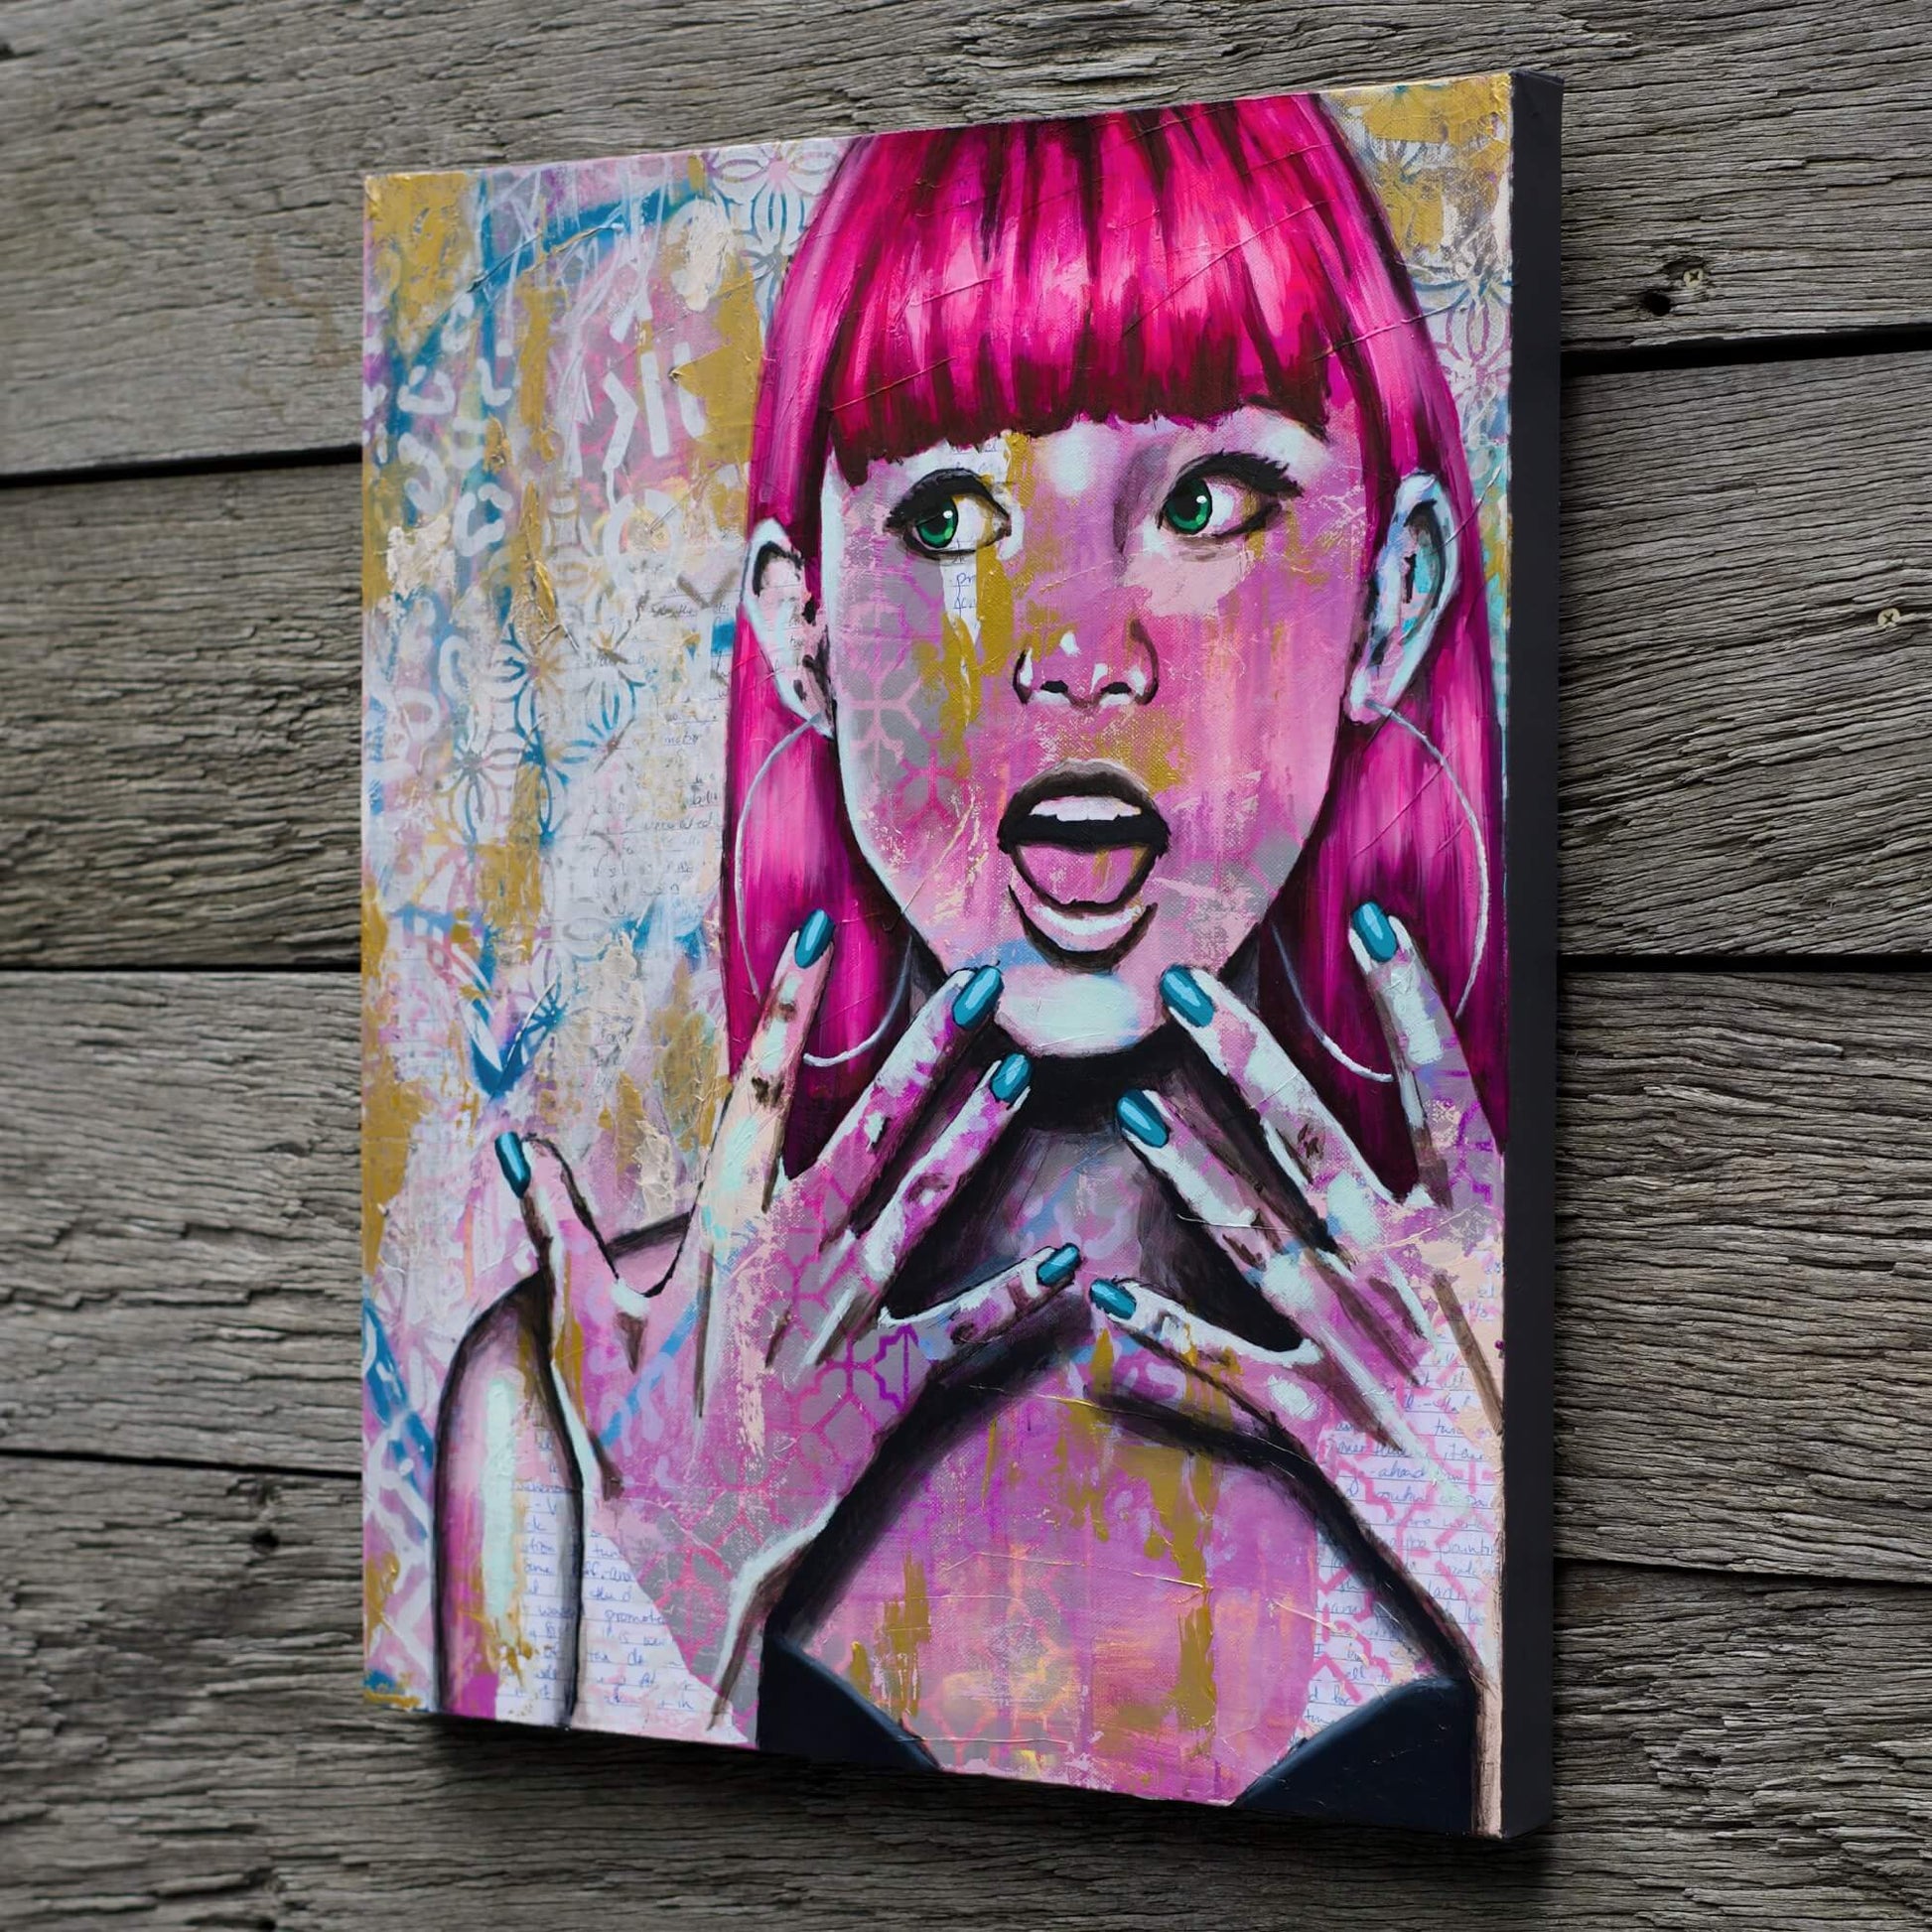 Abstract Art Paintings of Bold Women Mixed Media Street Art For Sale in Melbourne